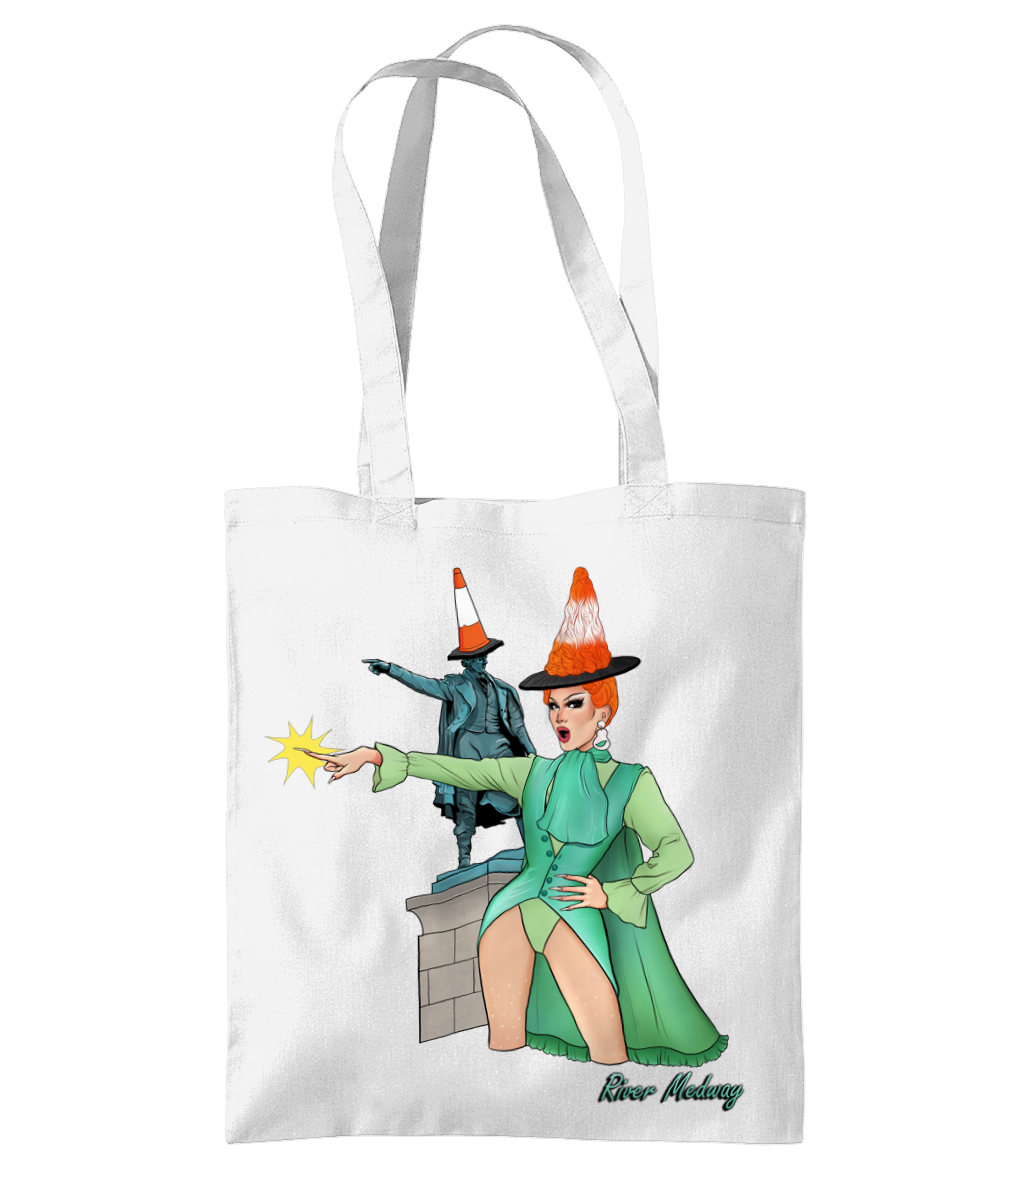 River Medway x Thomas Waghorn Tote Bag